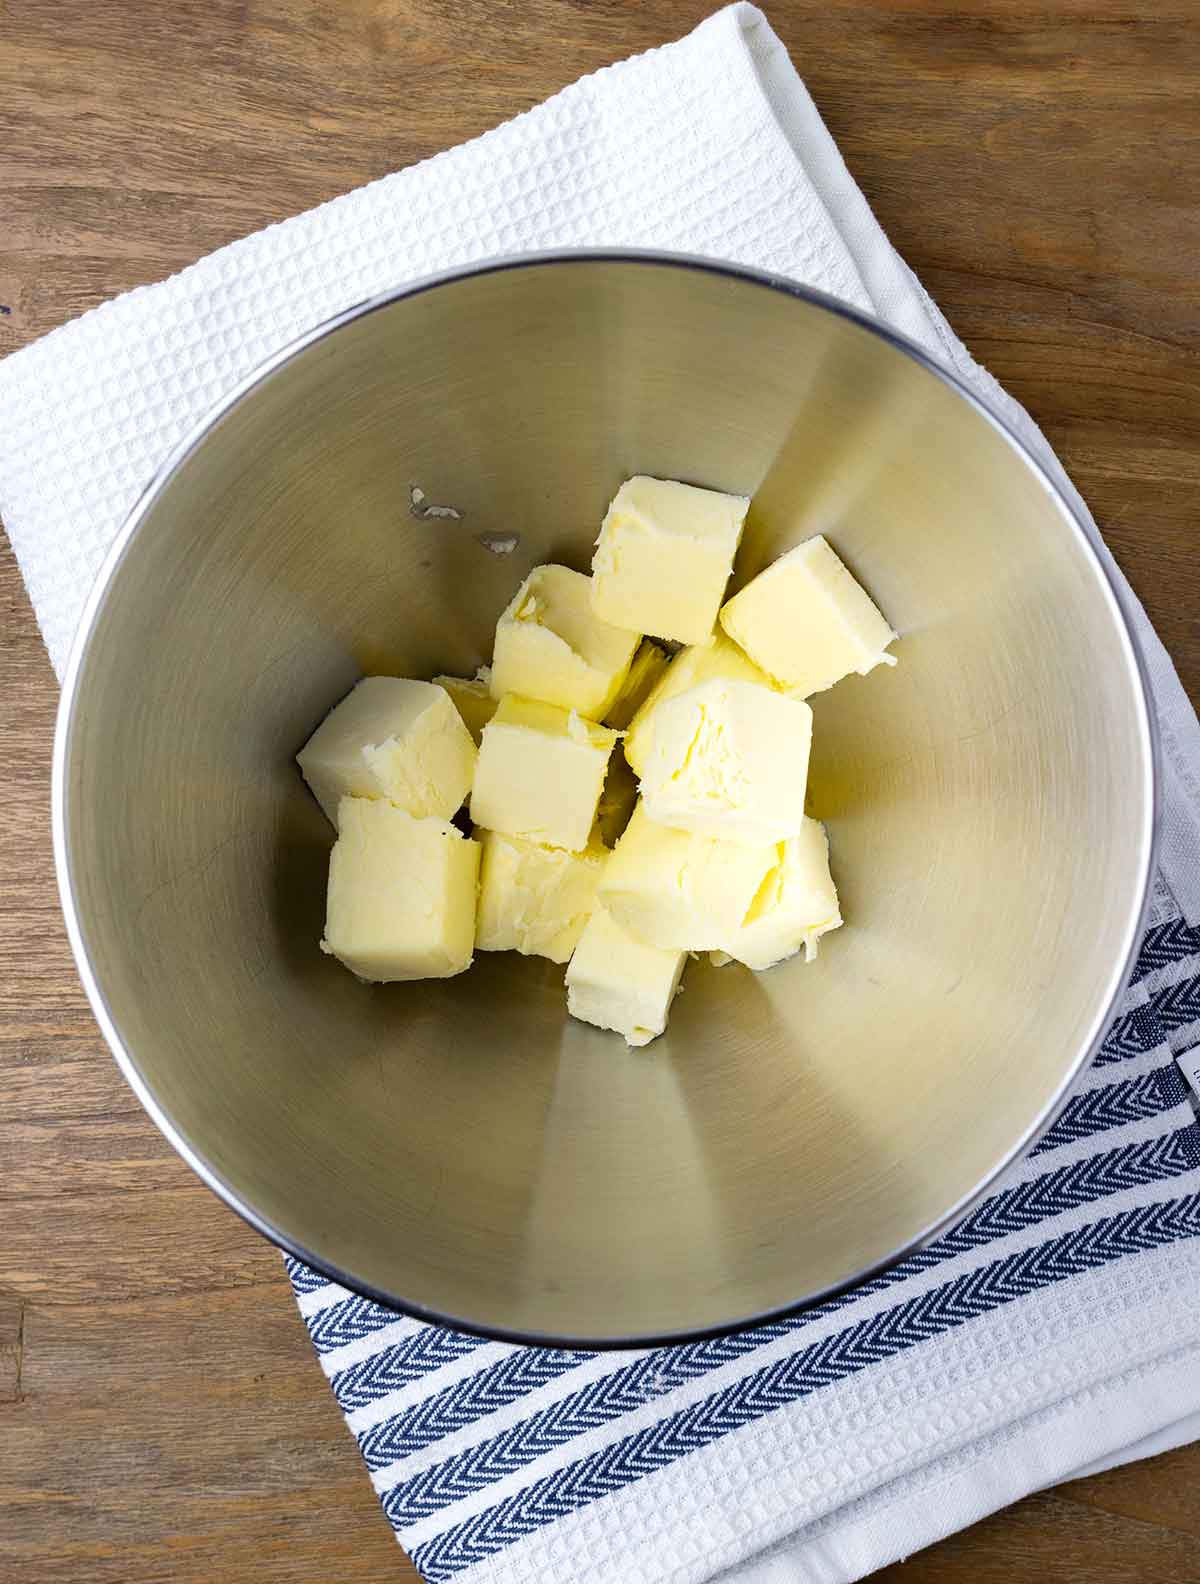 Sliced butter in a bowl